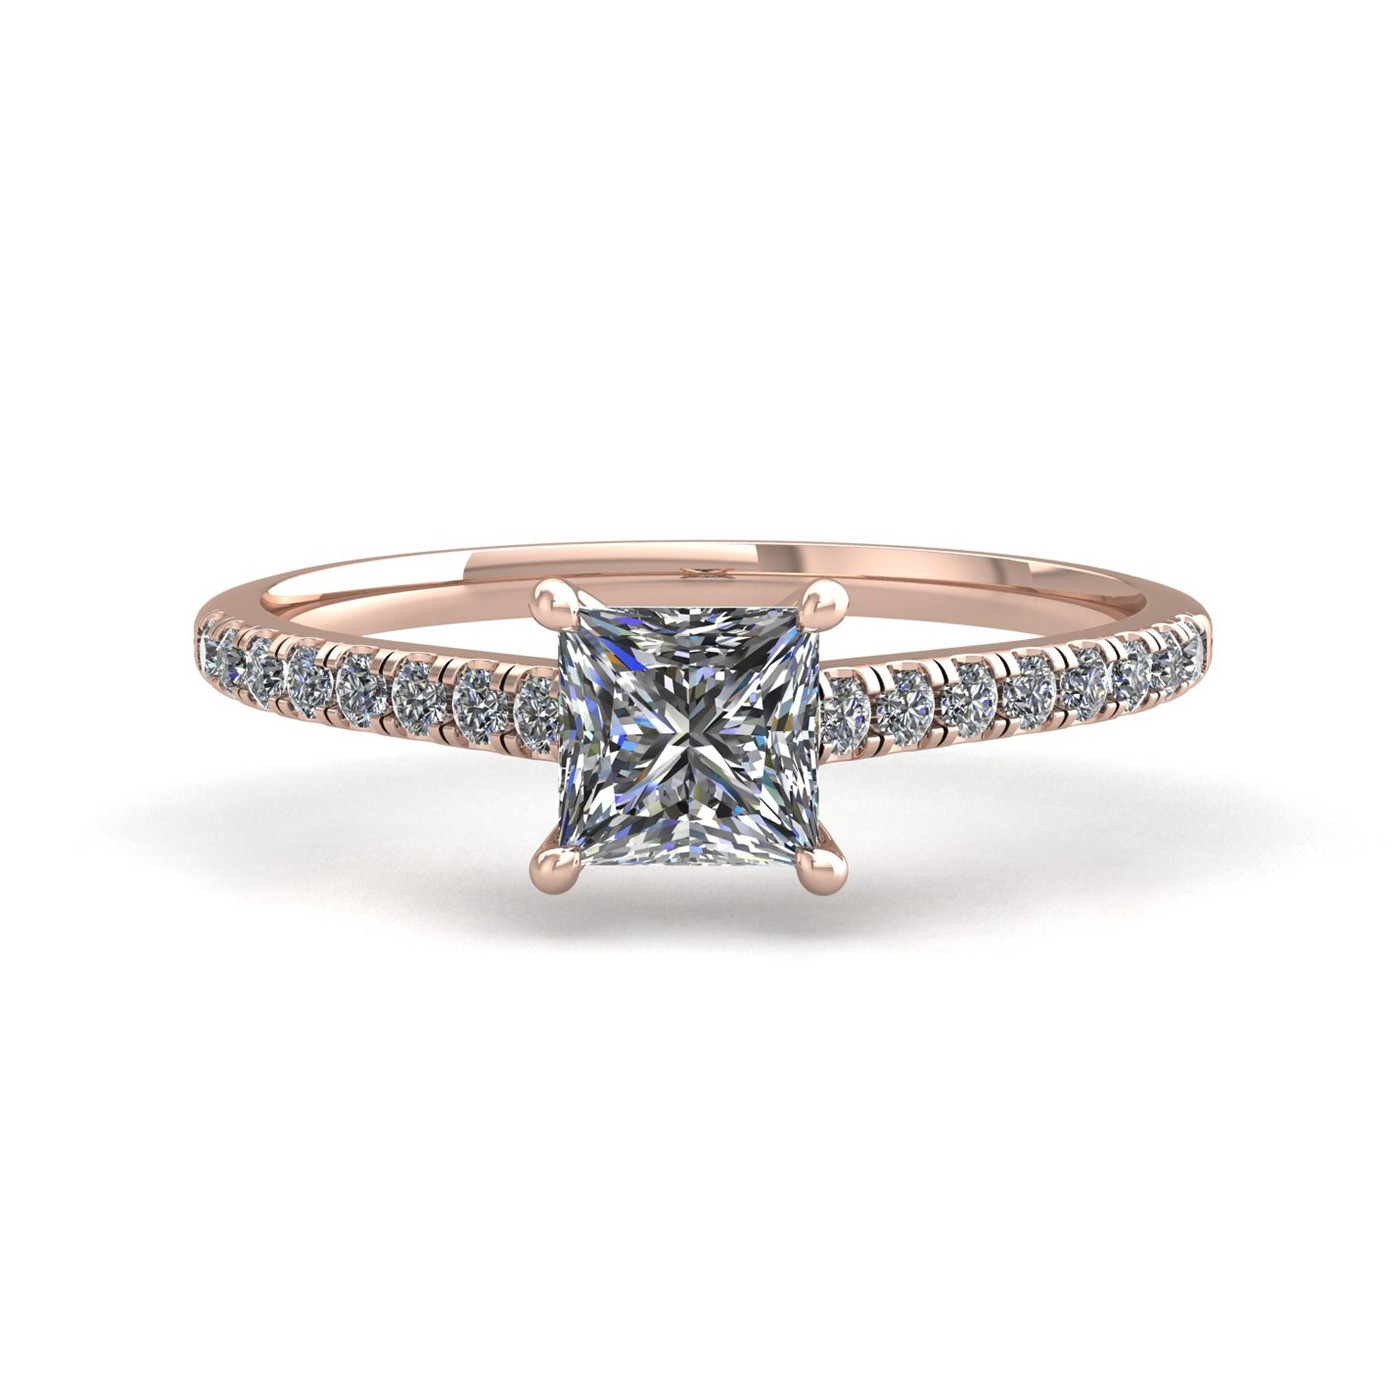 18k rose gold  1,20 ct 4 prongs princess cut diamond engagement ring with whisper thin pavÉ set band Photos & images